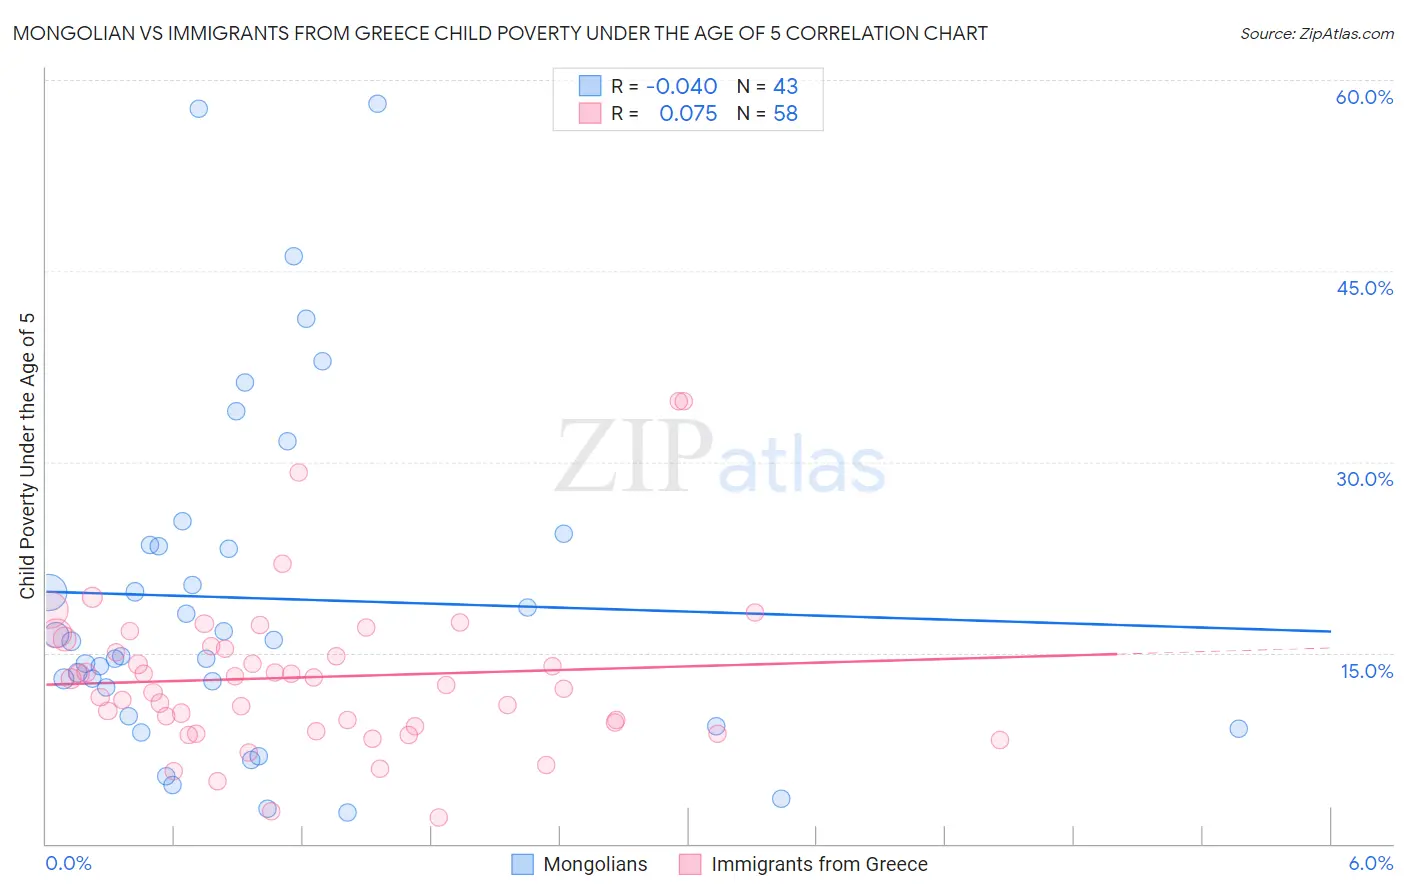 Mongolian vs Immigrants from Greece Child Poverty Under the Age of 5